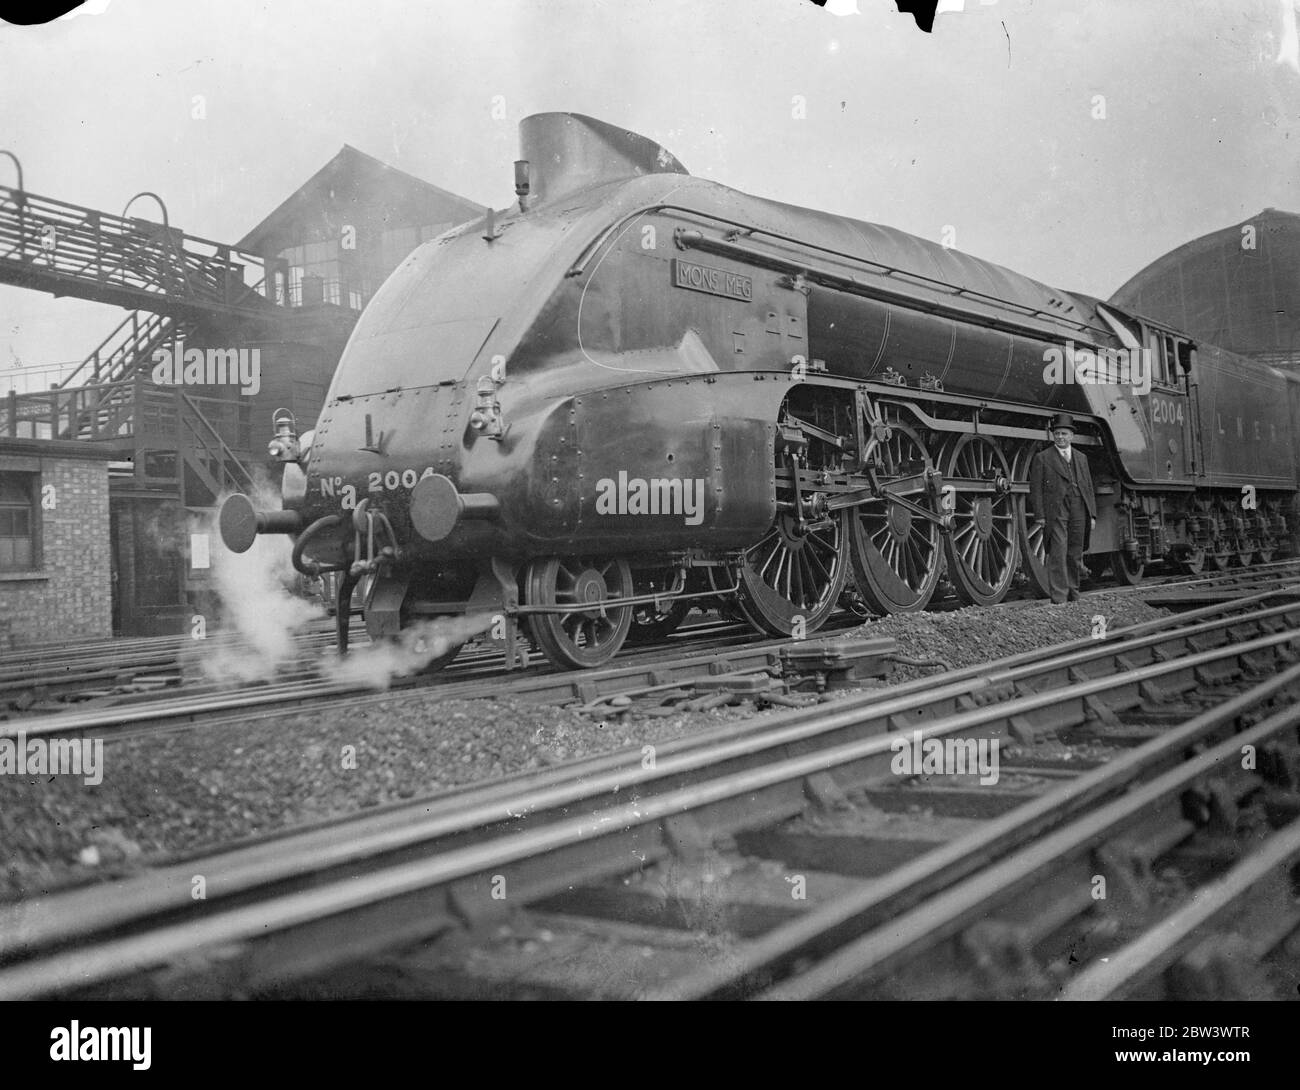 Britain ' s Most Powerful Engine , Streamlined Leaves London On First Run To Doncaster . Moons Meg , the latest type of streamlined locomotive and the most powerful passenger engine in Britain , left King ' s Cross Station on its first run to Doncaster . The locomotive weighs over 165 tons and was built specially for the East Coast services where there are steep gradients . Photo shows : Mons Meg leaving King ' s Cross for Doncaster pulling a train 550 tons in weight . 21 Aug 1936 Stock Photo